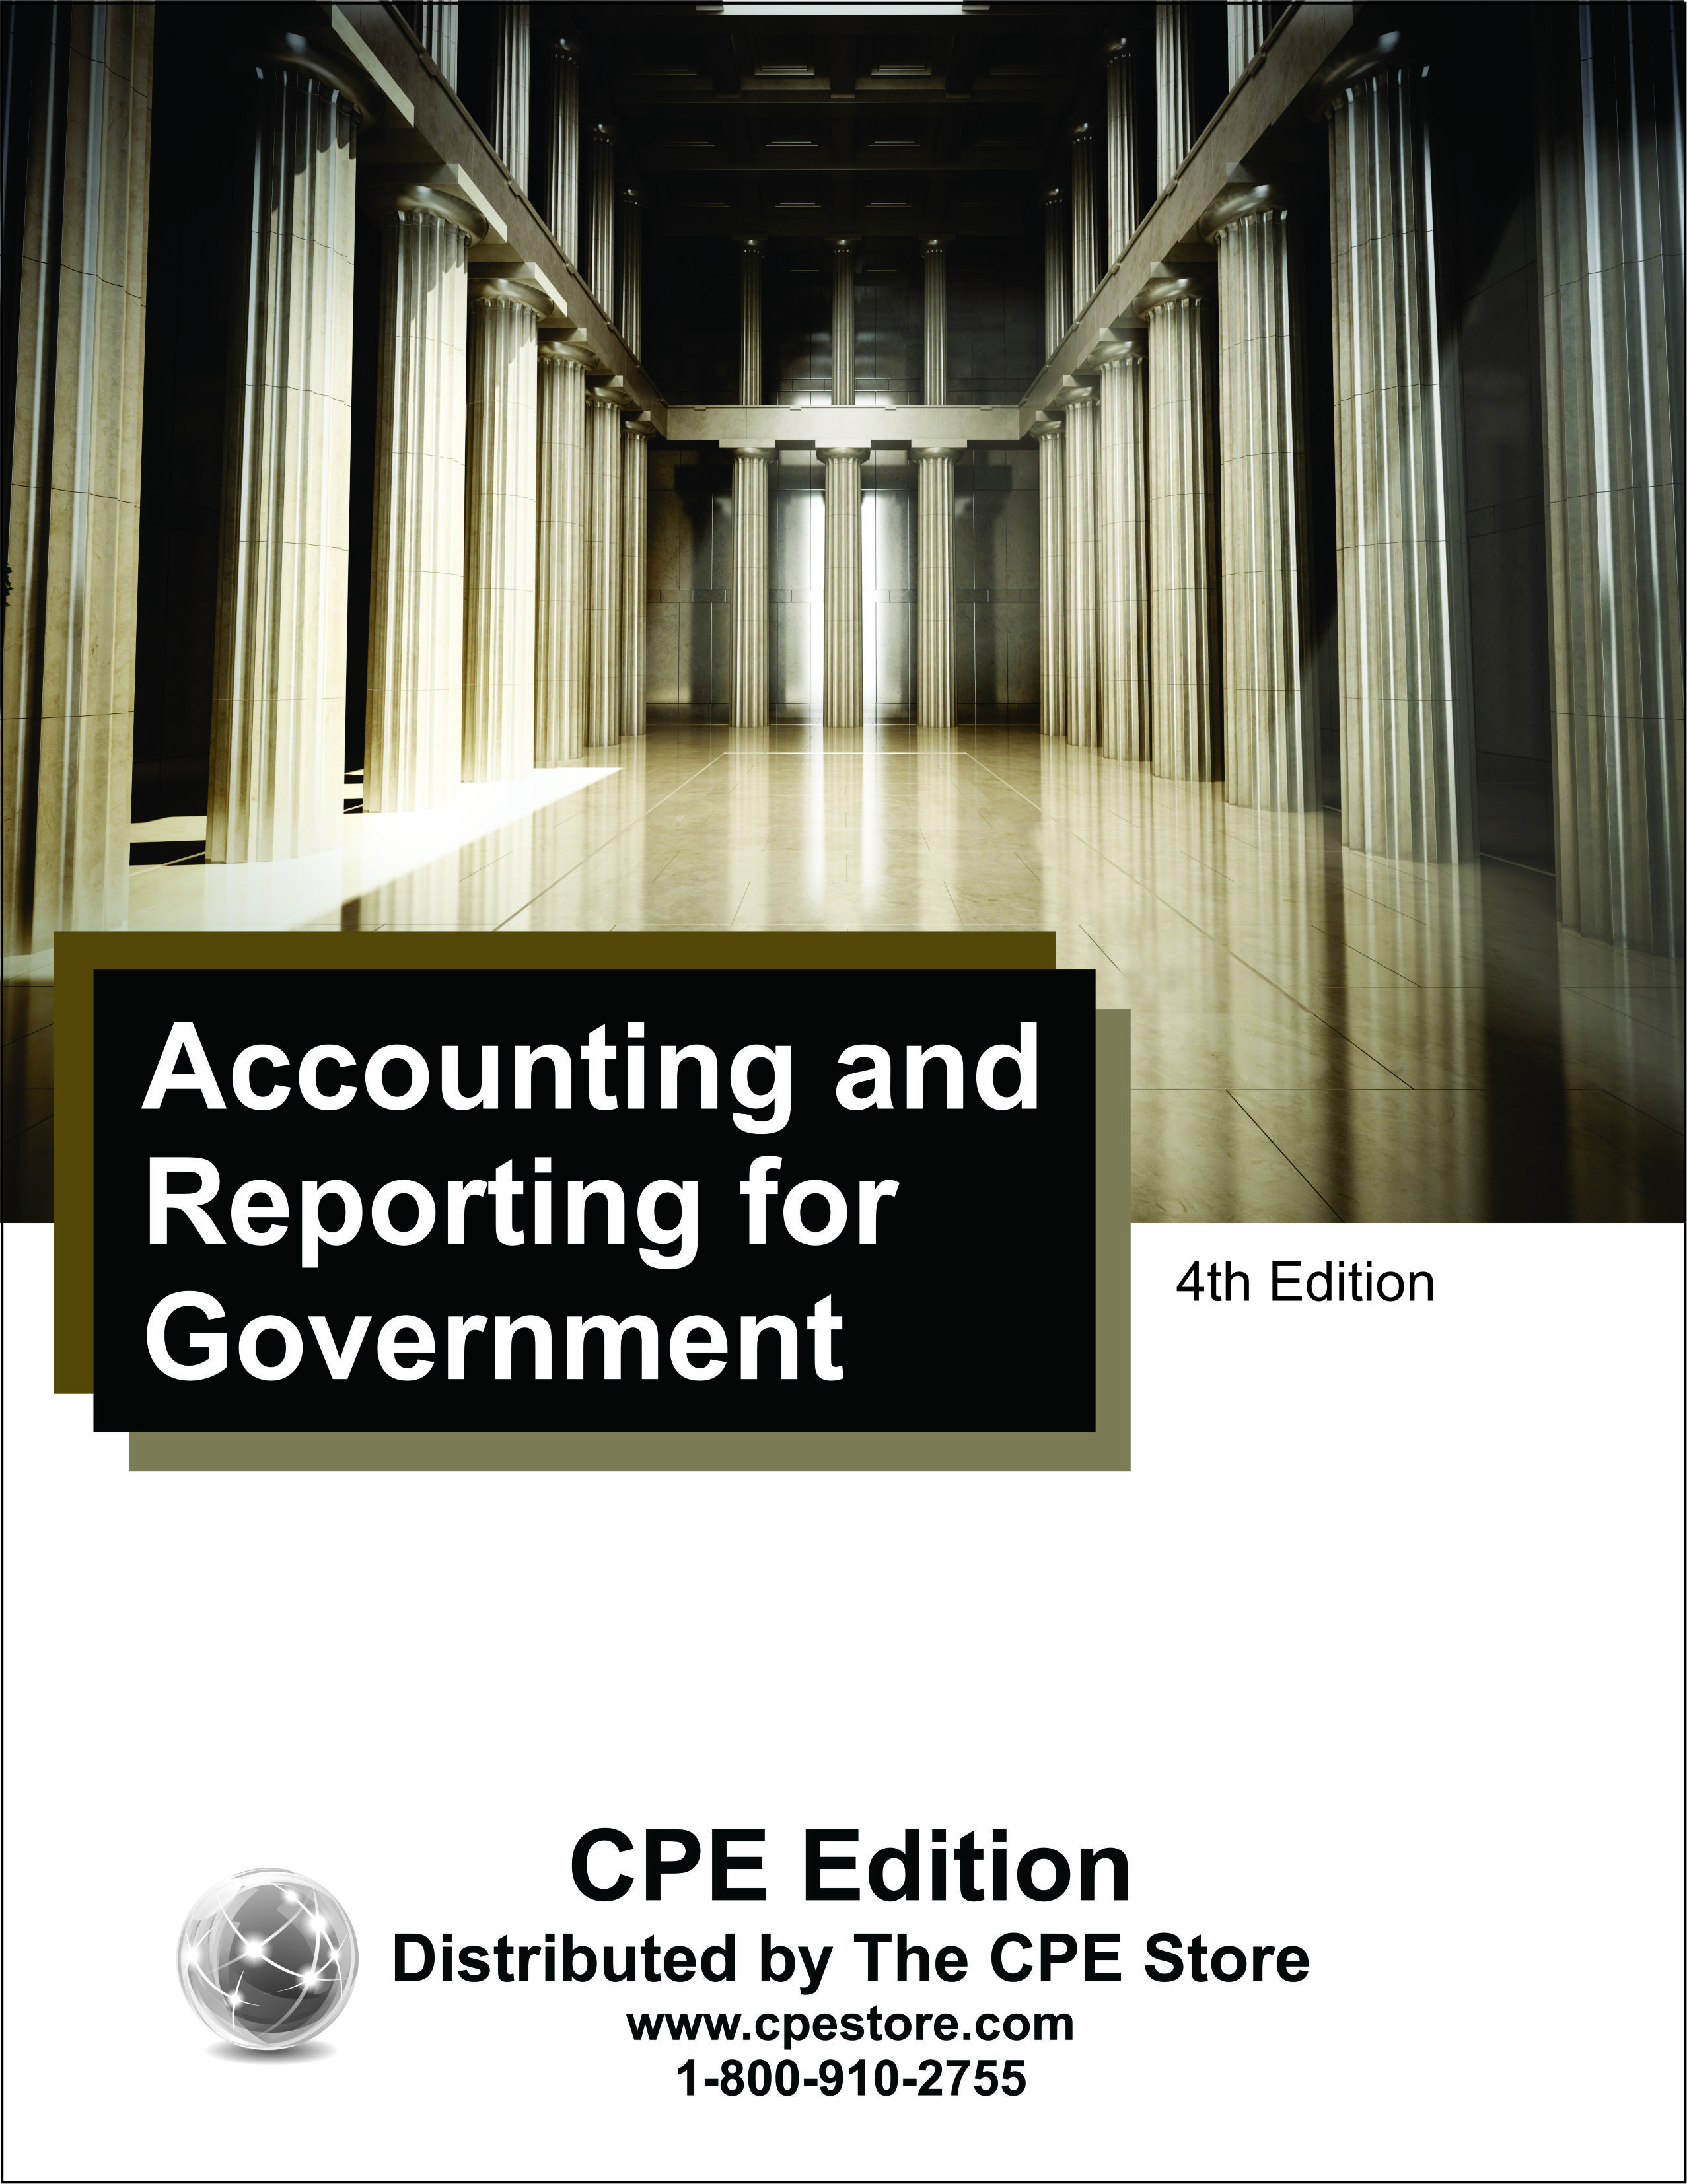 Accounting and Reporting for Government